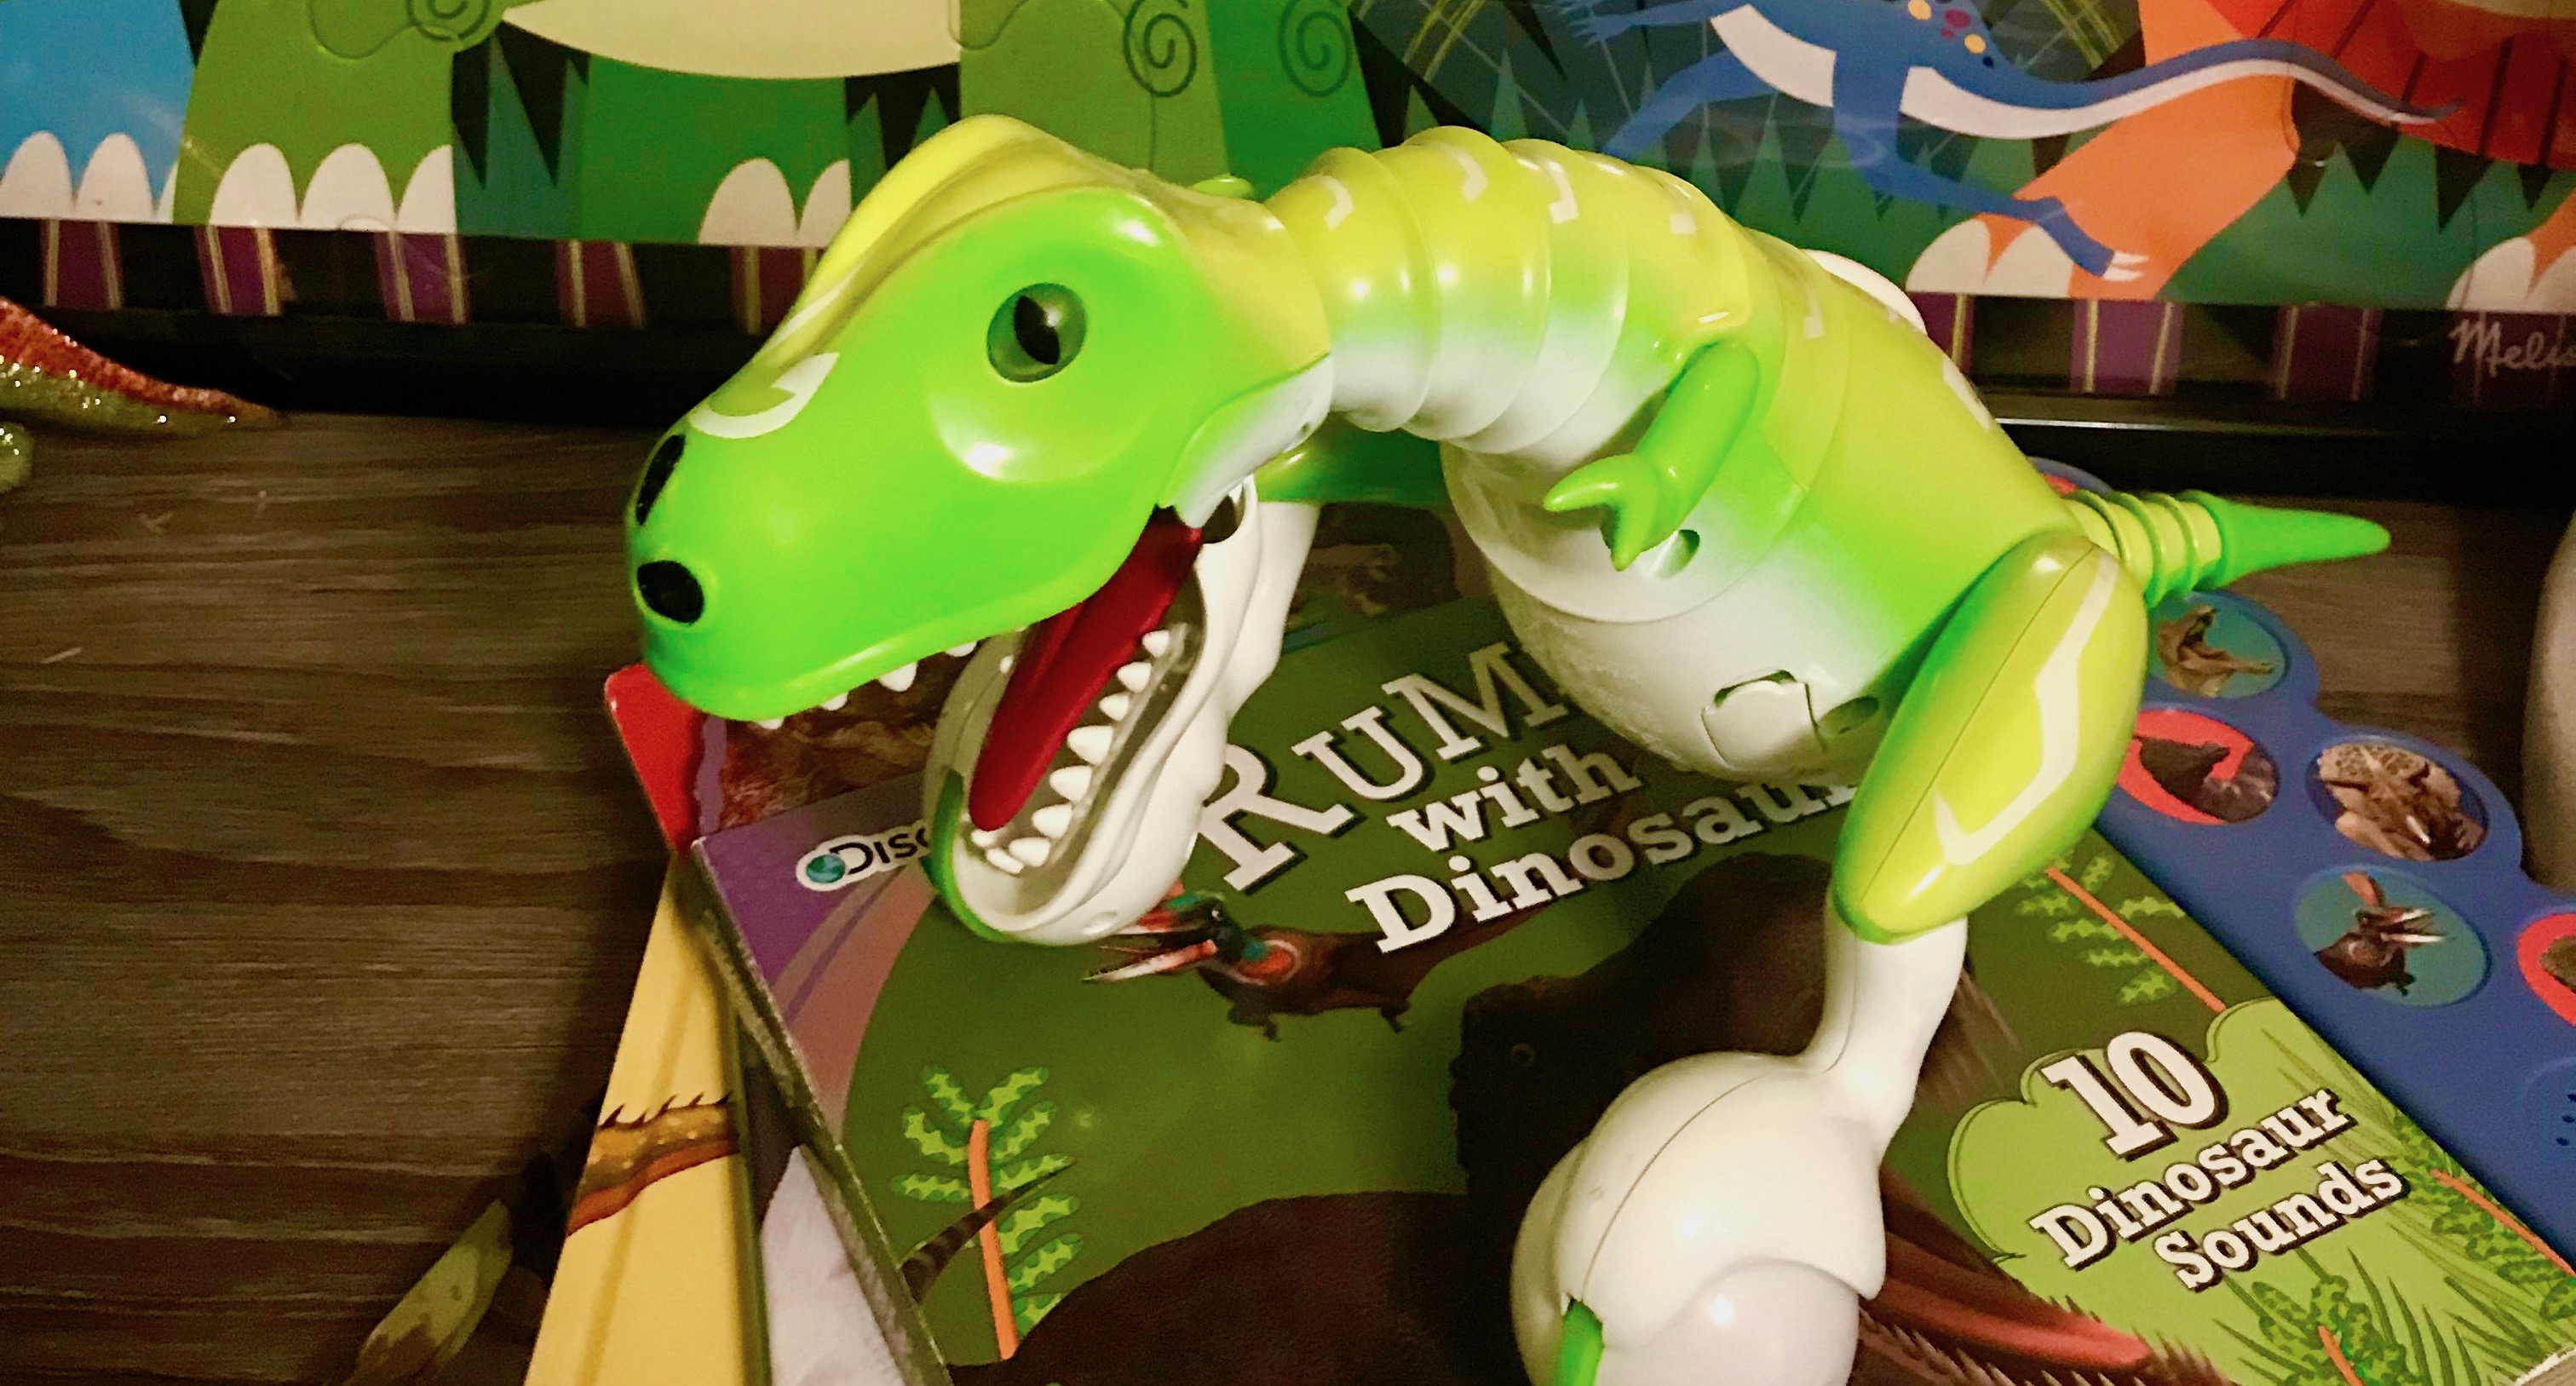 The perfect gifts for your dinosaur obsessed child.